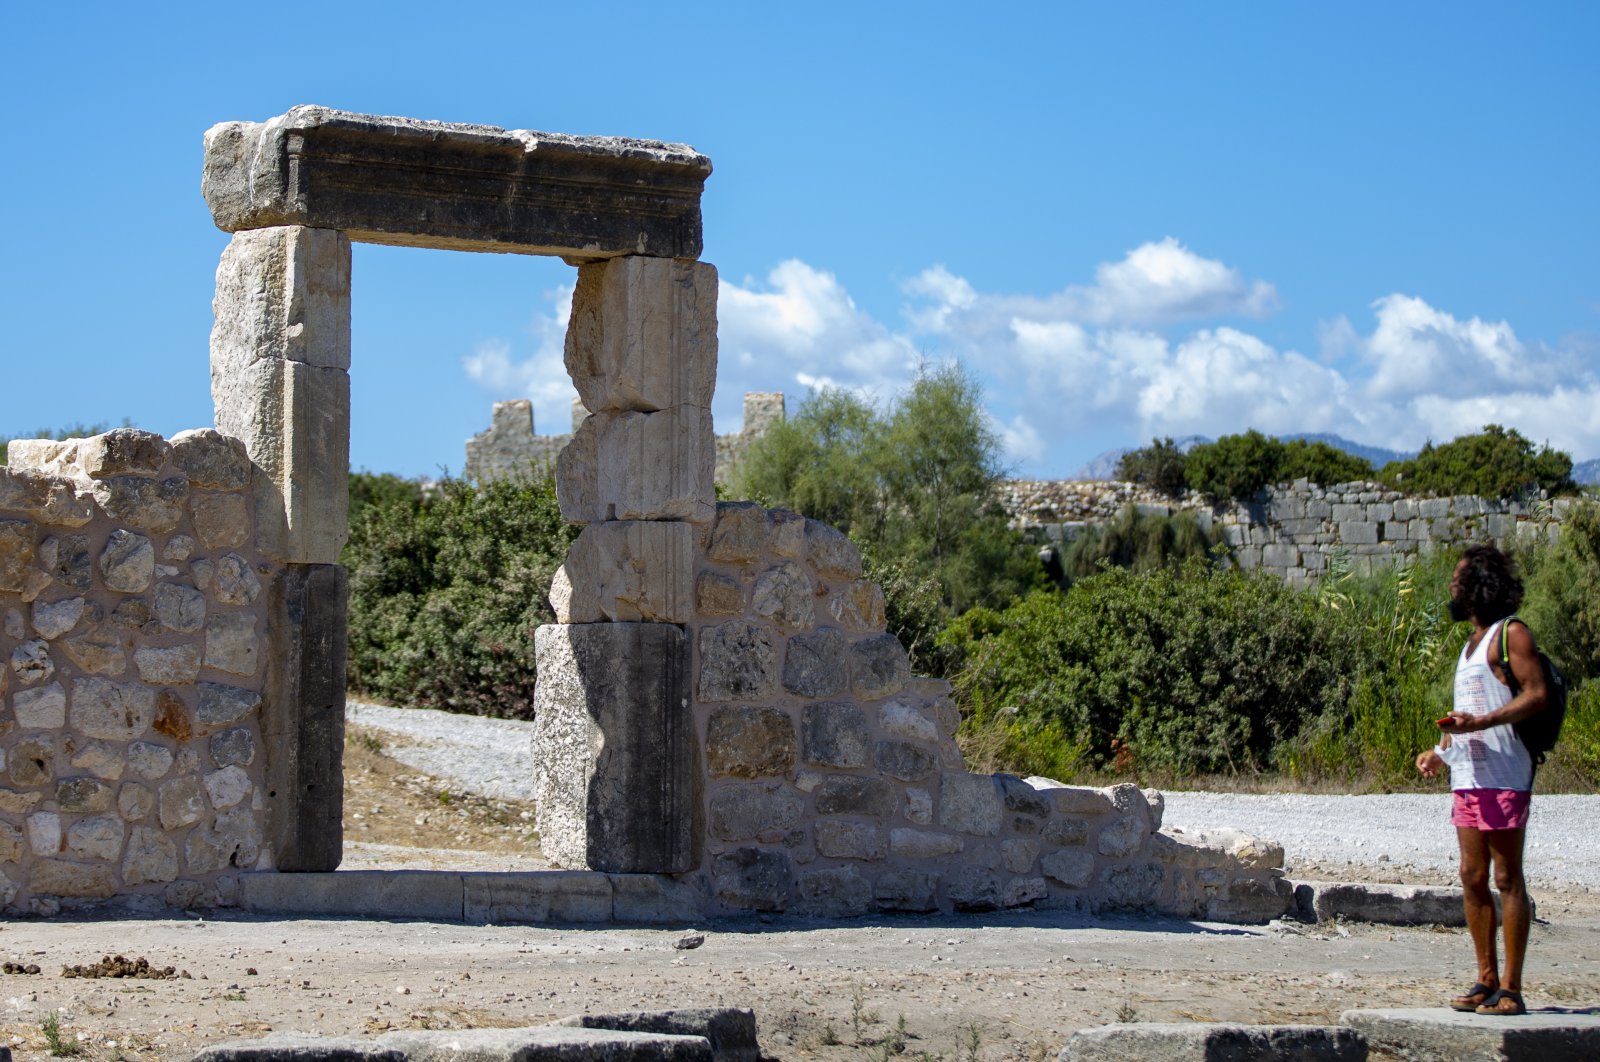 The gate of the bath in the ancient city of Patara, Antalya, southern Turkey, Oct. 11, 2020. (AA Photo)